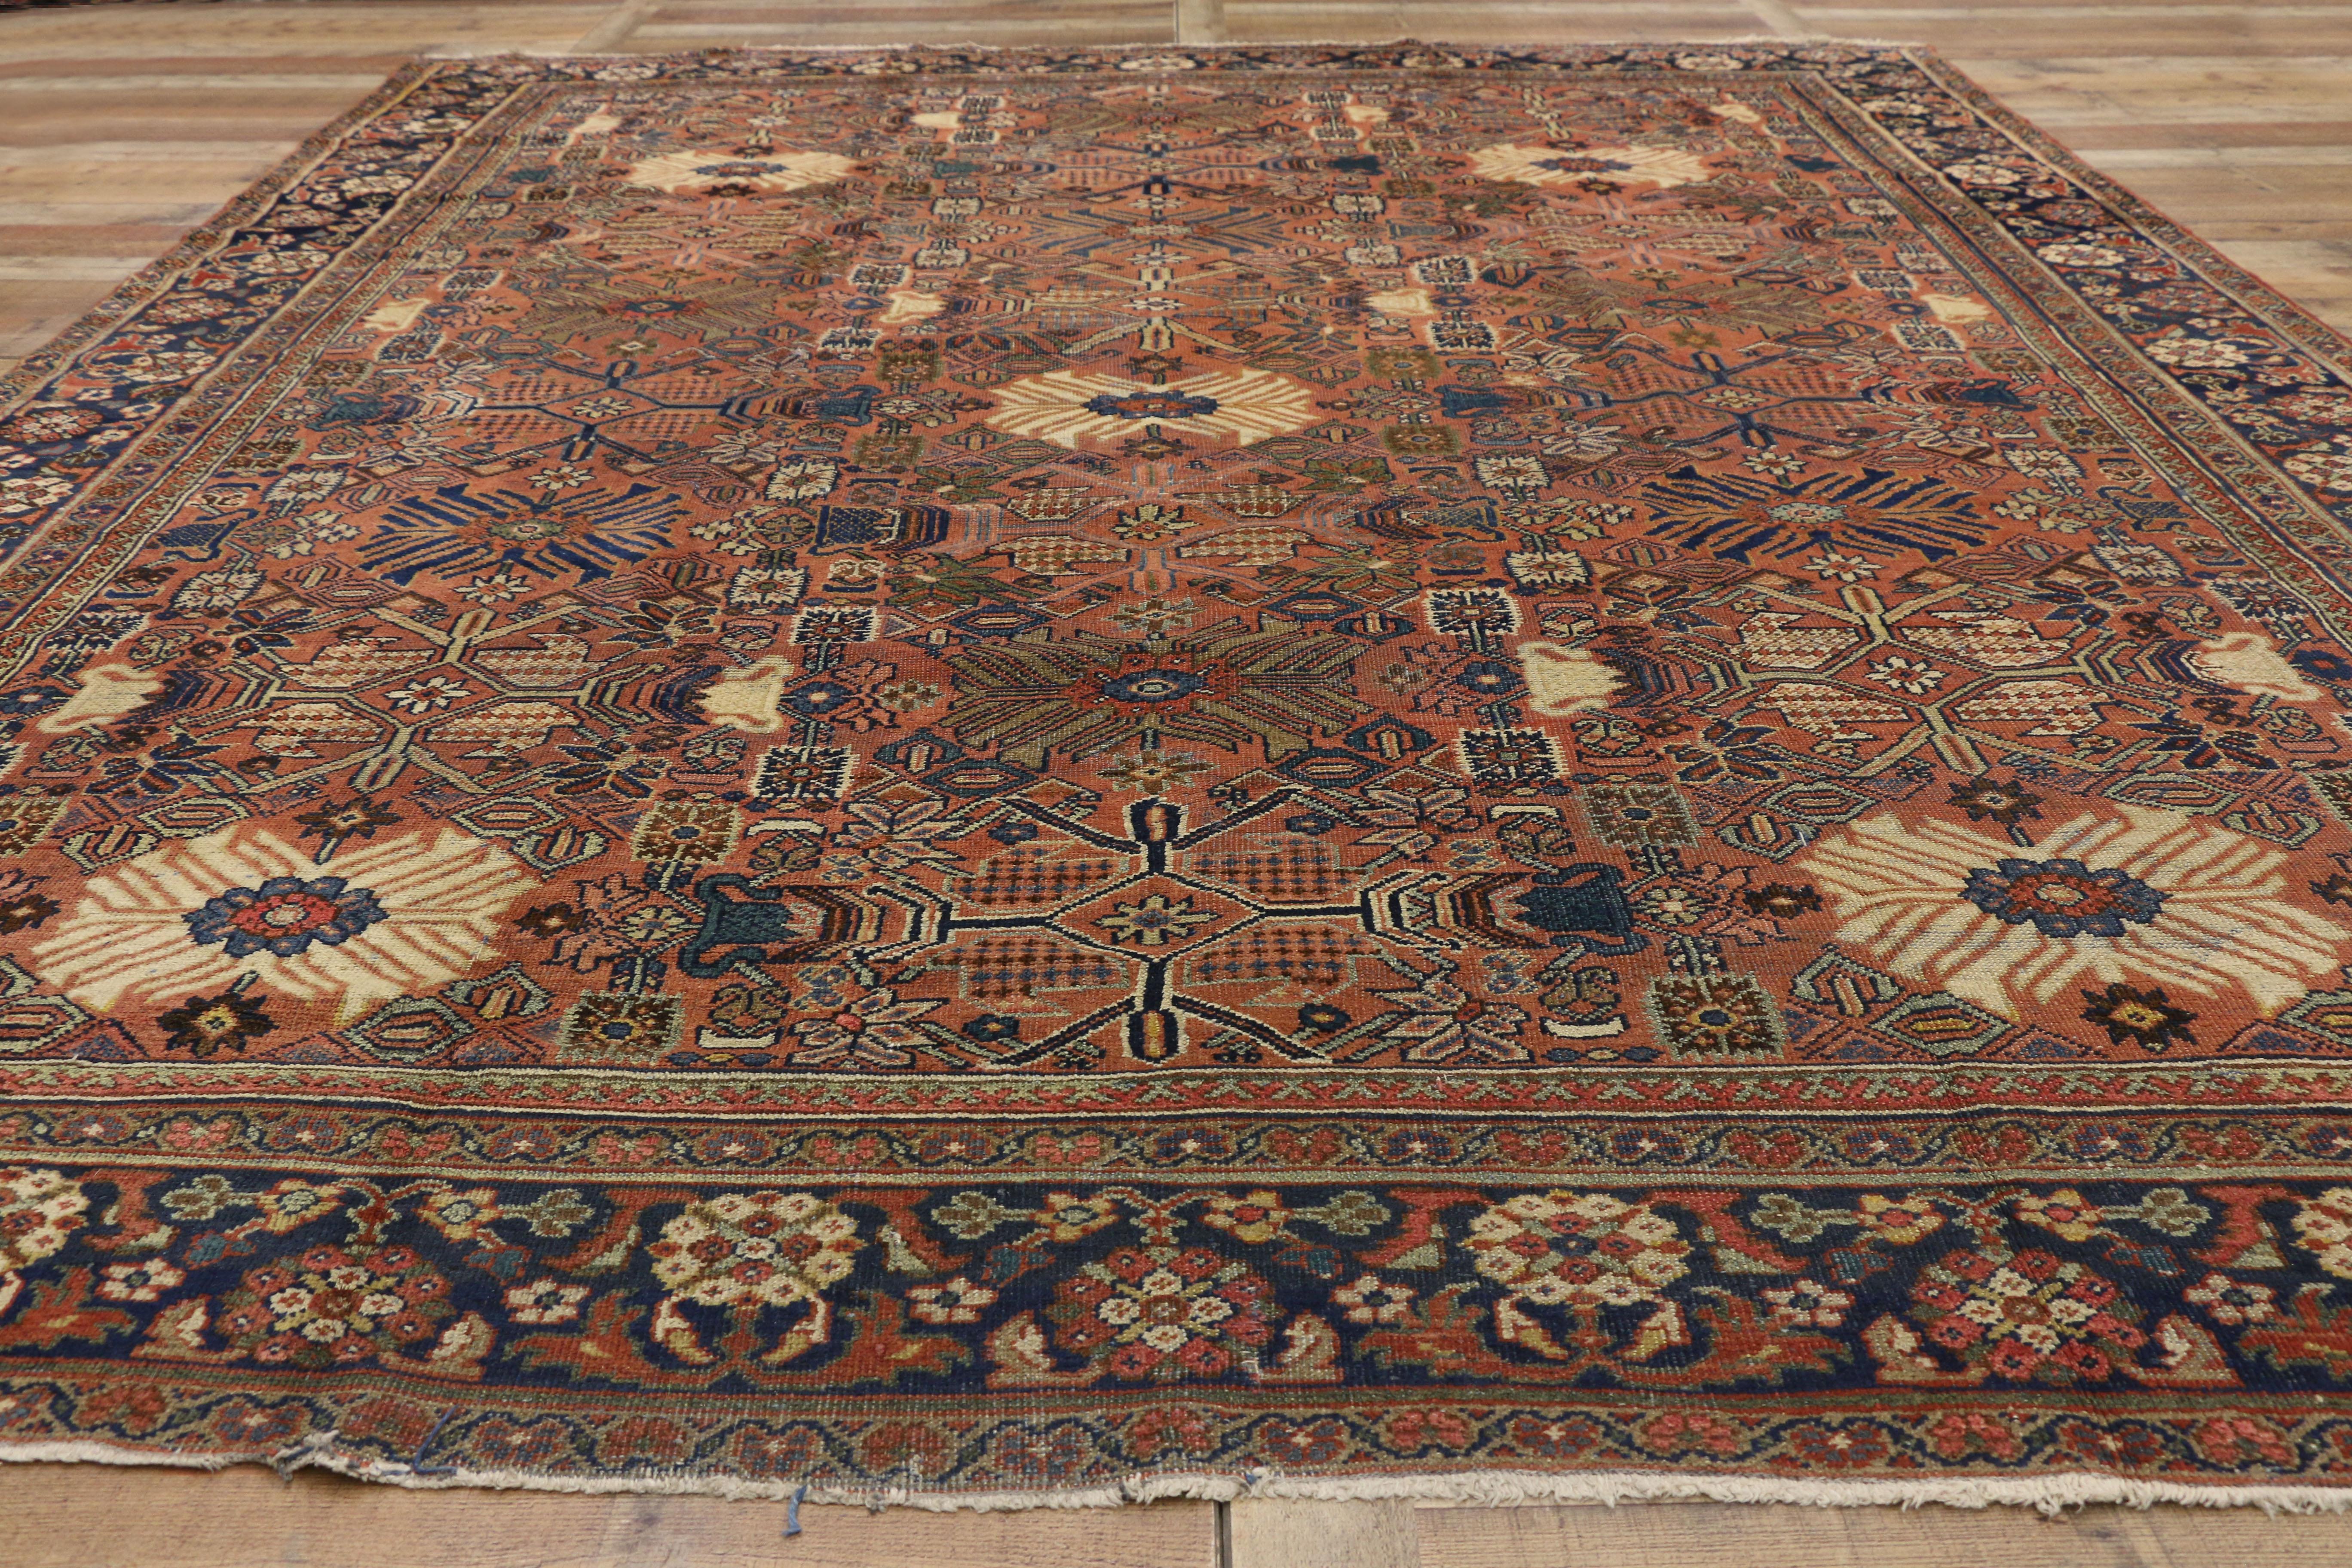 Antique Persian Mahal Rug with Rustic Arts and Crafts Style 1